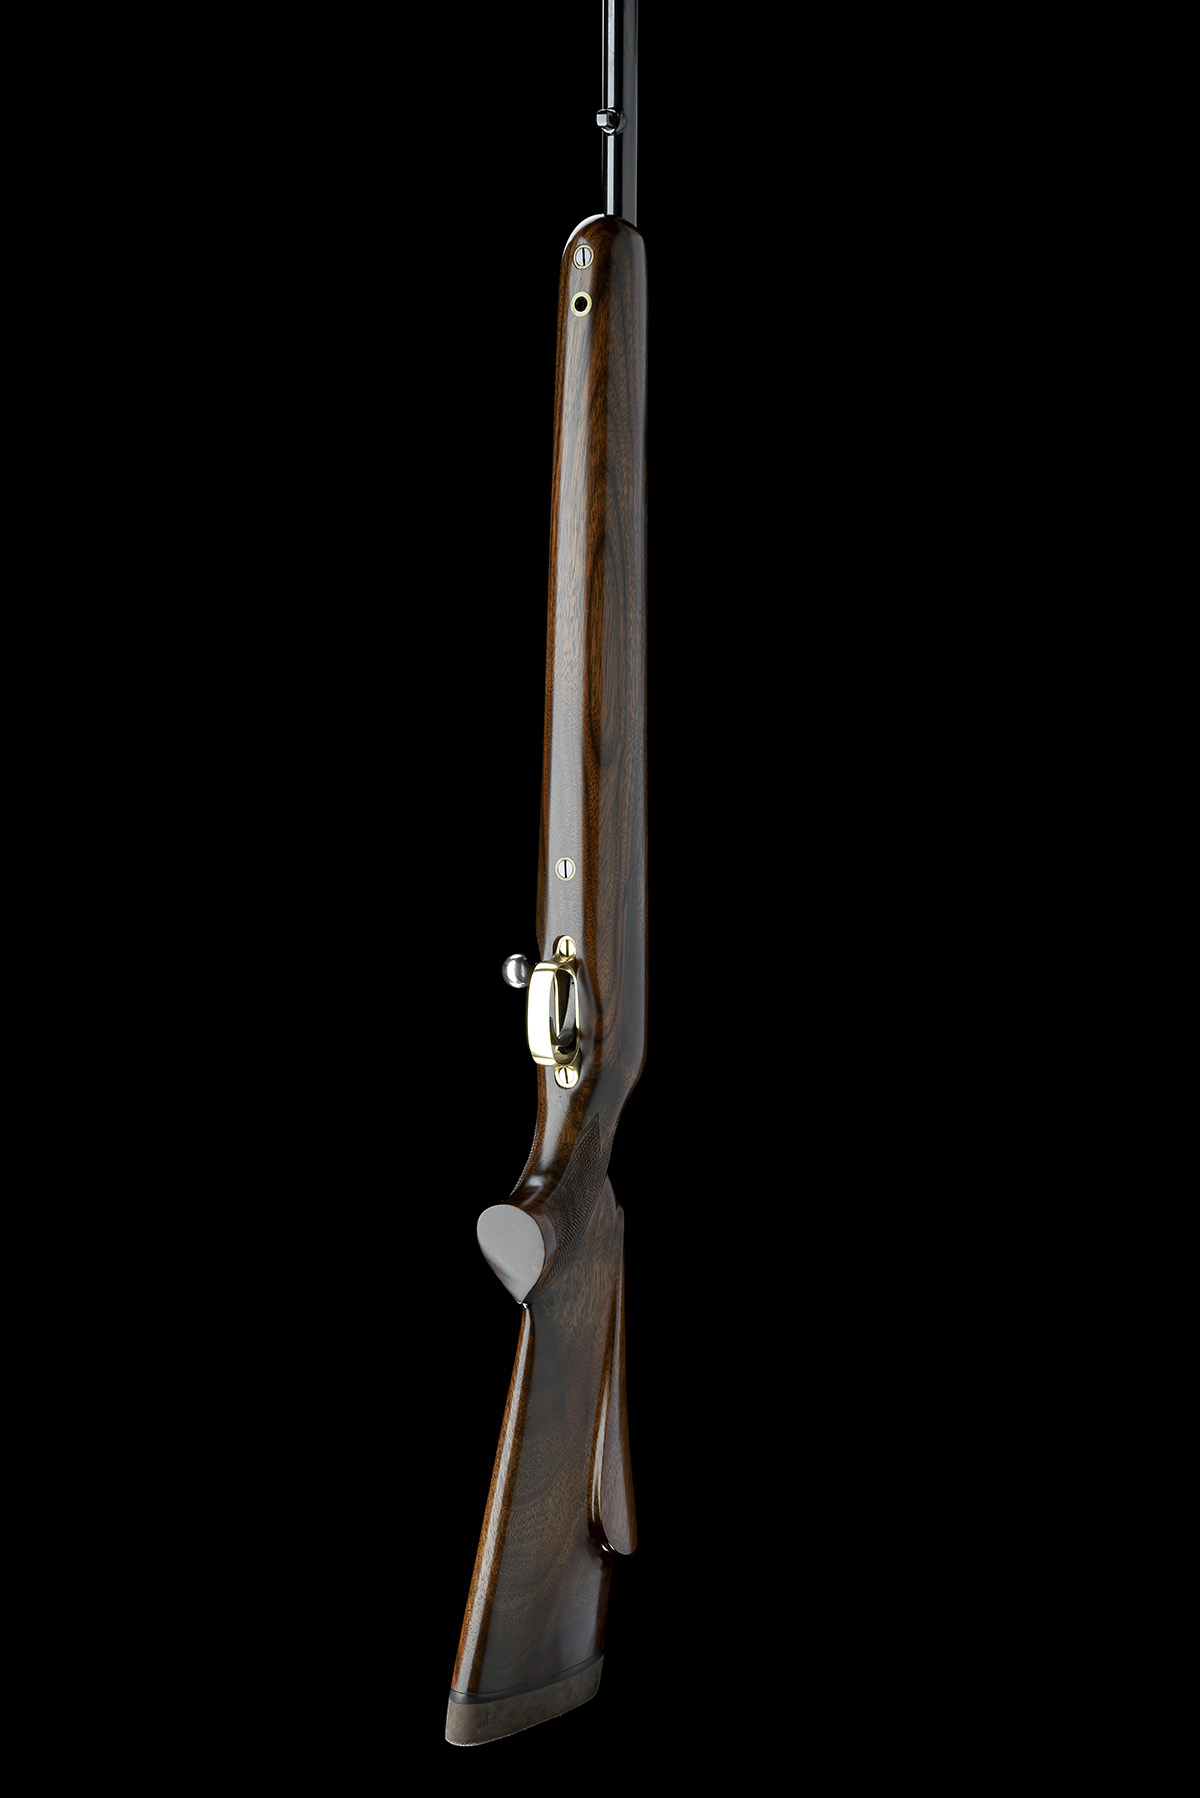 A CASED RARE ISP SPARTAN BOLT-ACTION ENGRAVED CUSTOM PNEUMATIC AIR-RIFLE, serial no. 004 085, - Image 8 of 11